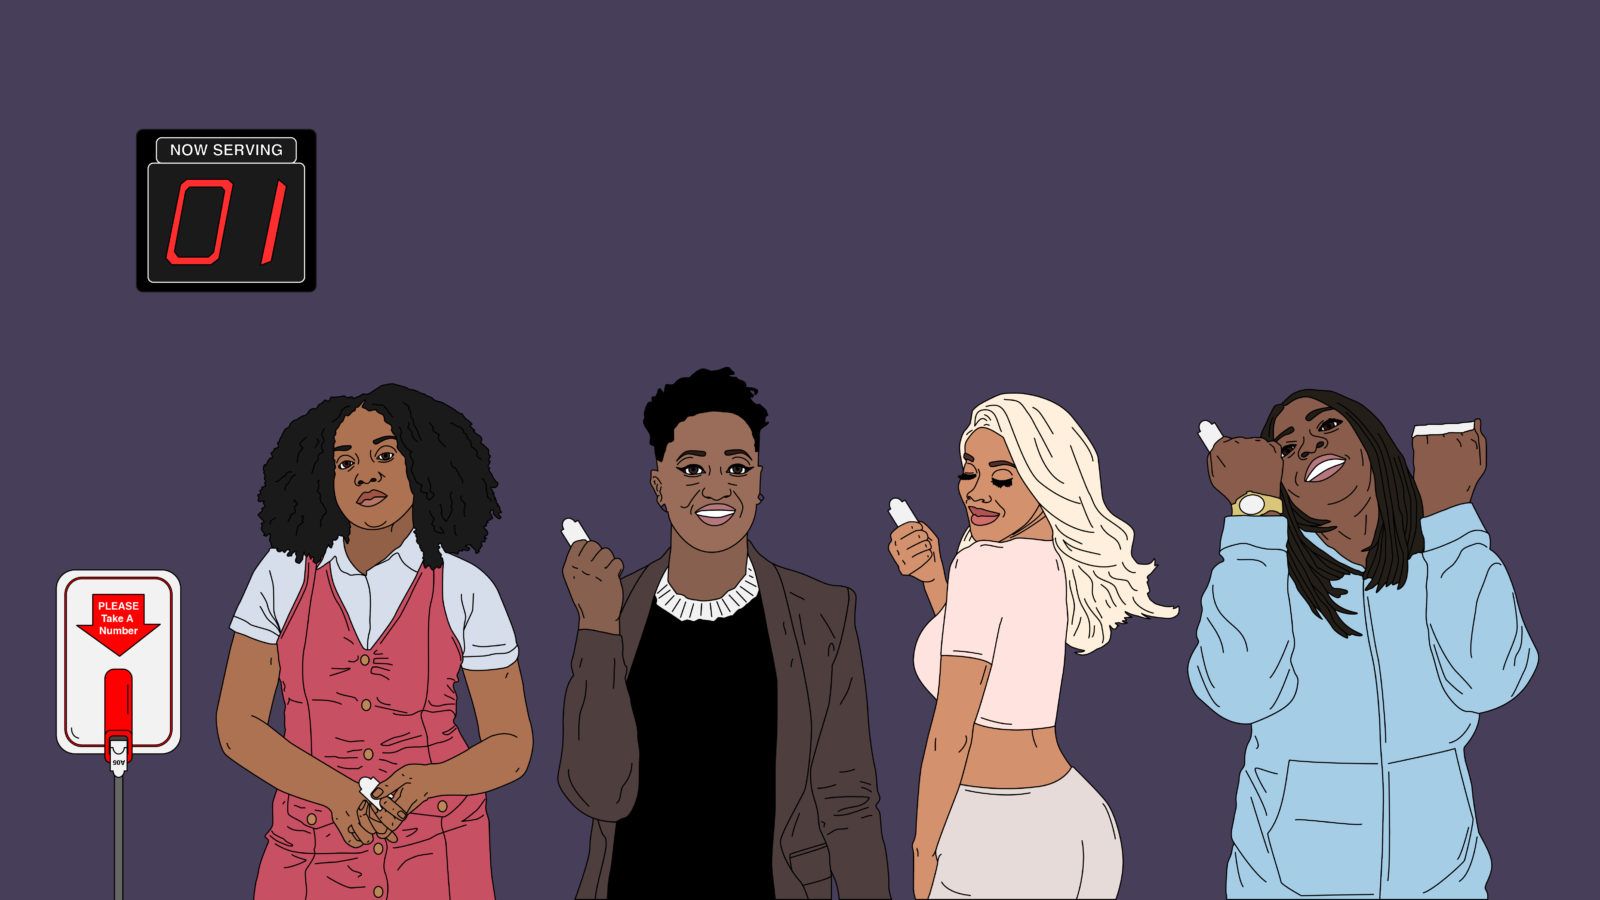 Animated Rappers Wallpaper